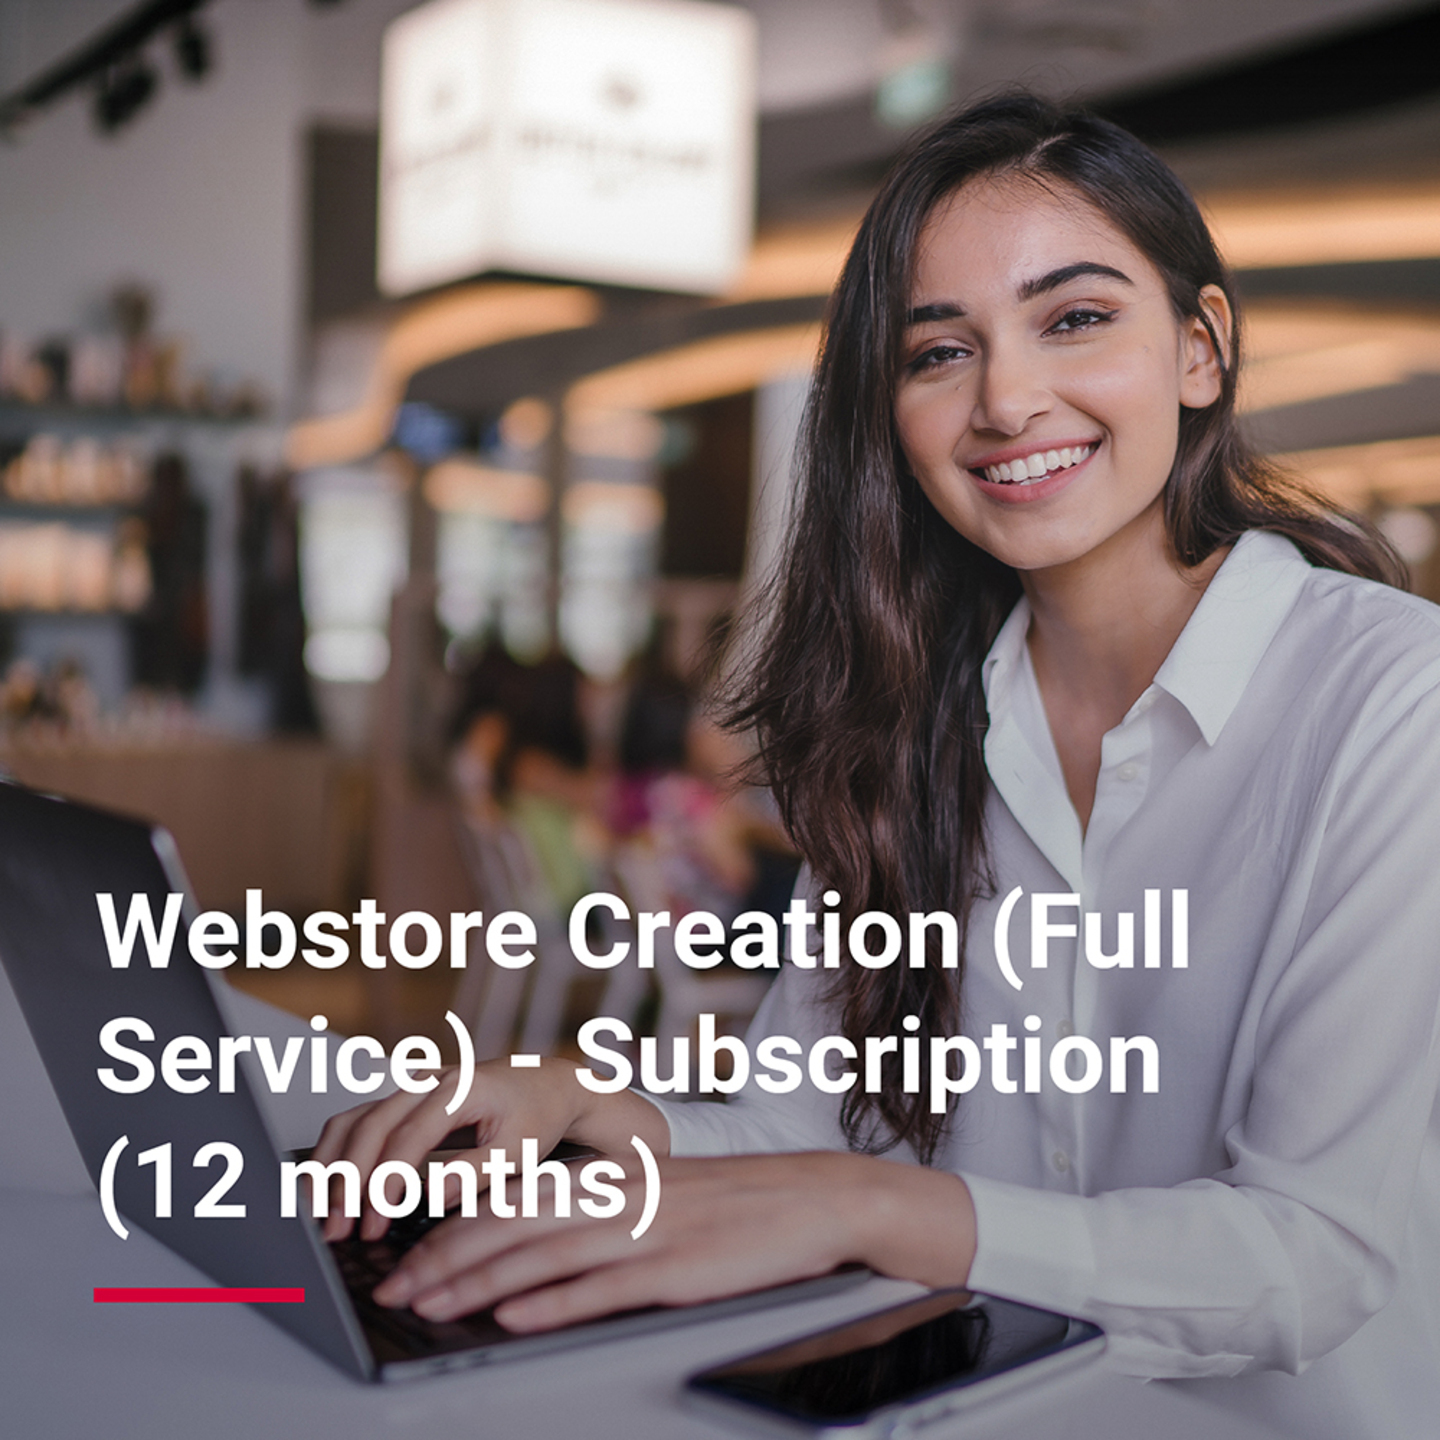 Webstore Creation Full Service - Subscription  12 months